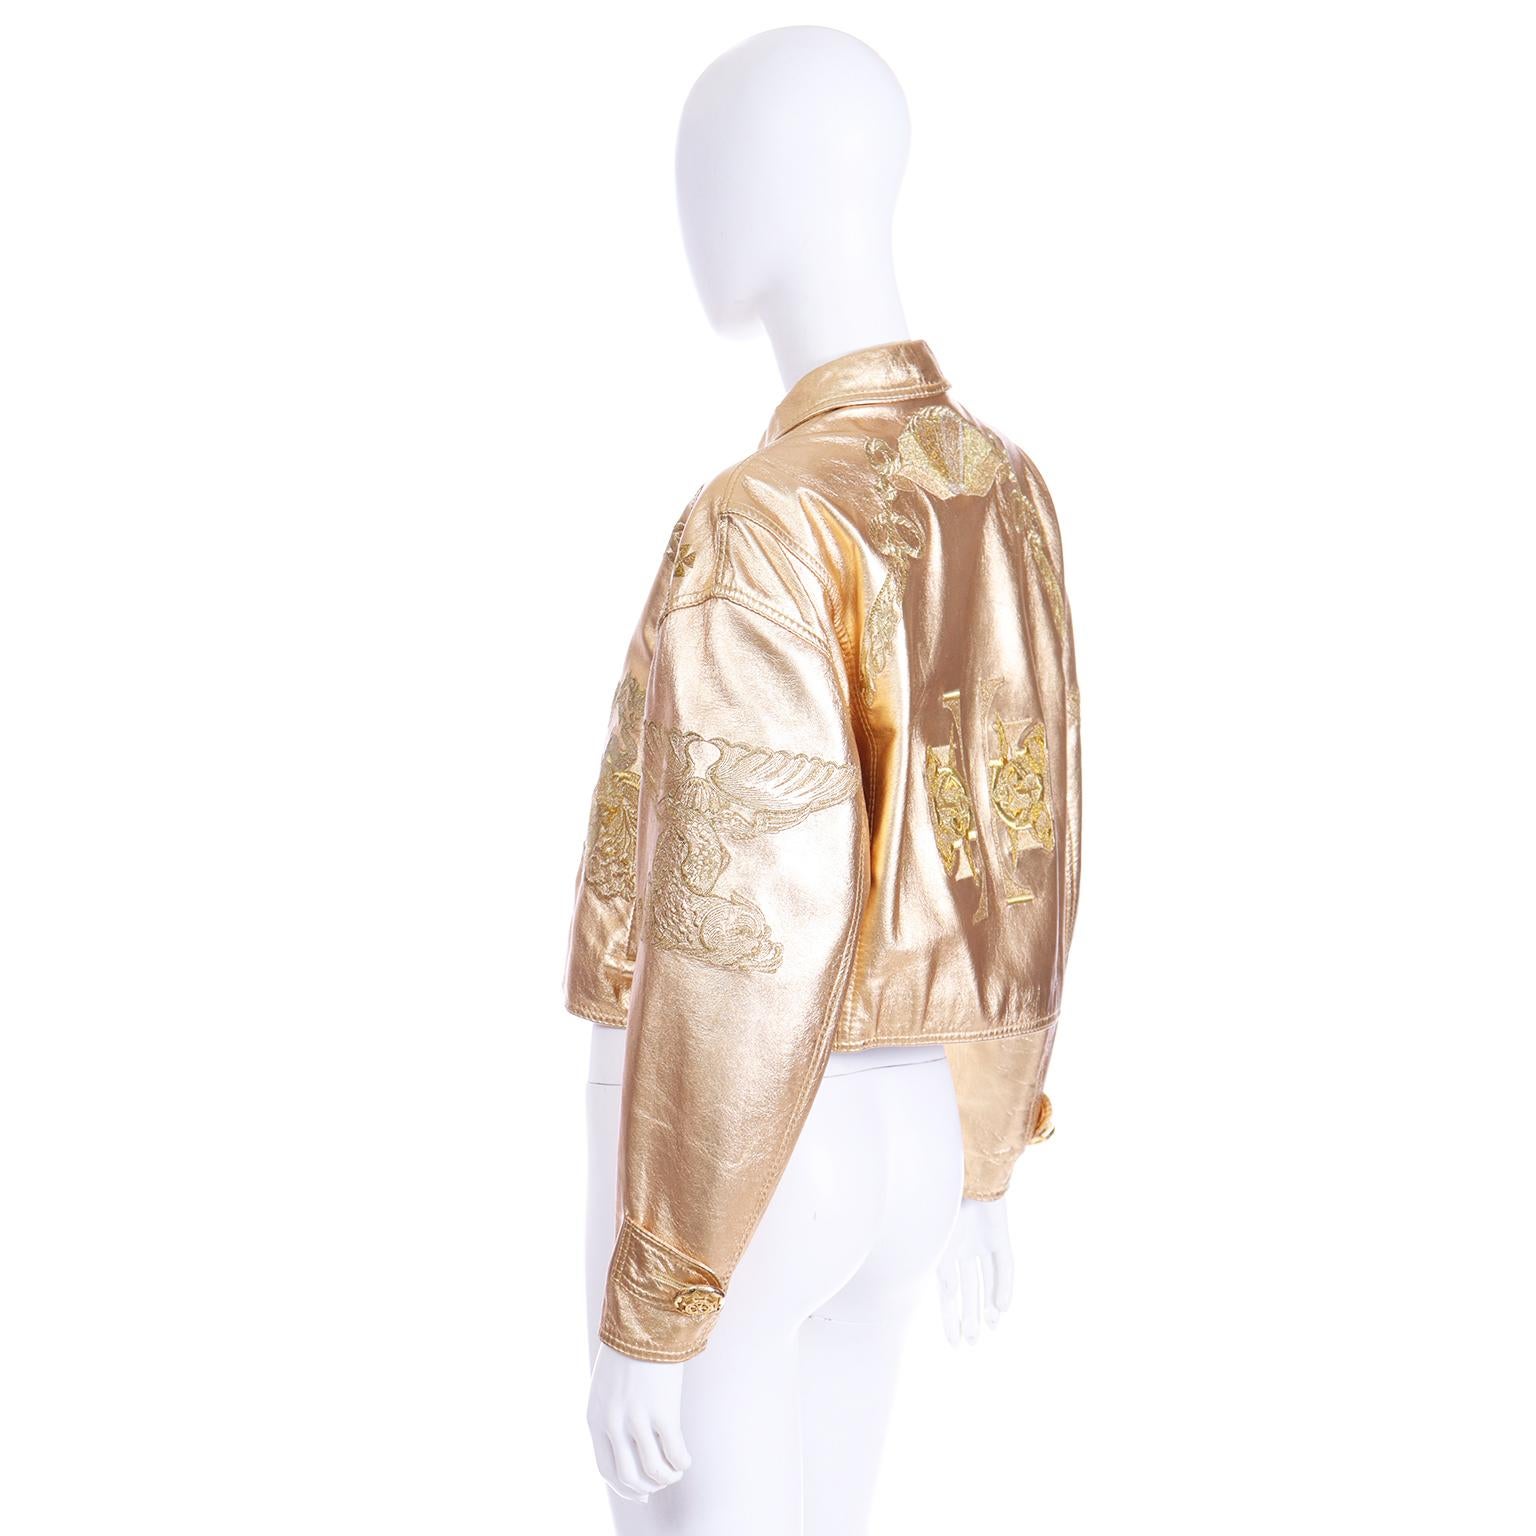 Gianfranco Ferre S/S 1992 Runway Gold Leather Embroidered Ocean Theme Jacket For Sale 1